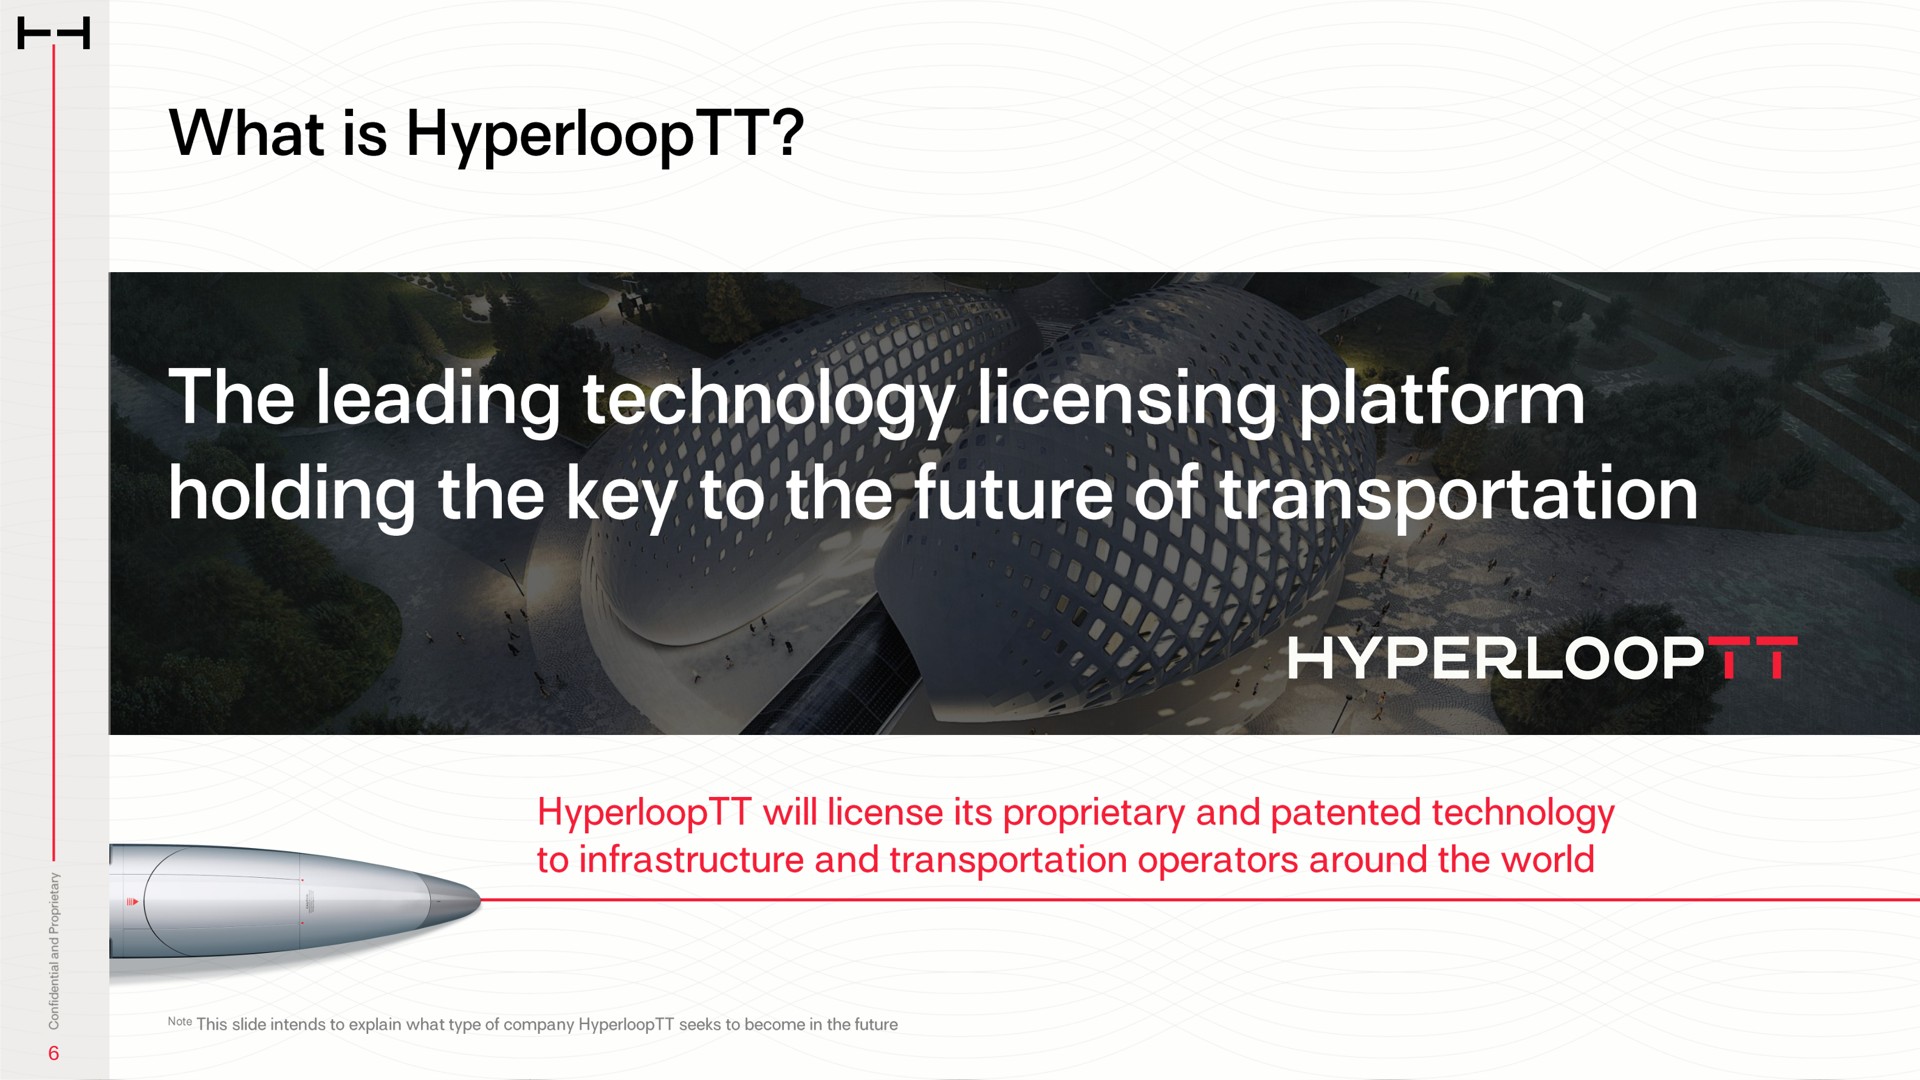 what is the leading technology licensing platform holding the key to the future of transportation | HyperloopTT